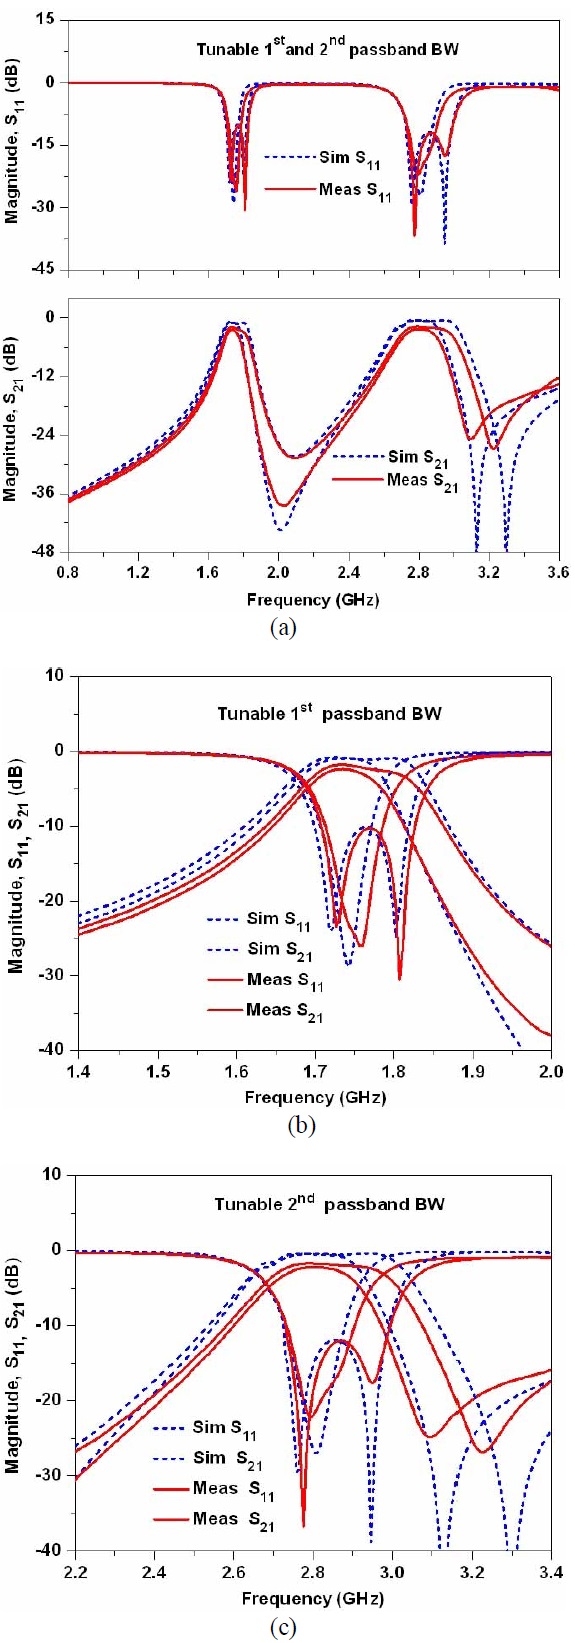 Simulation and measurement results for filter I with tunable bandwidths (BWs) in both passbands simultaneously. (a) both passbands, (b) magnified first band characteristics, and (c) magnified second band characteristics. Bias voltage variation: VCv1-f1=15 V, VCv2-f1 =6 to 15 V, VCv1-f2=15 V, and VCv2-f2=8 to 15 V.